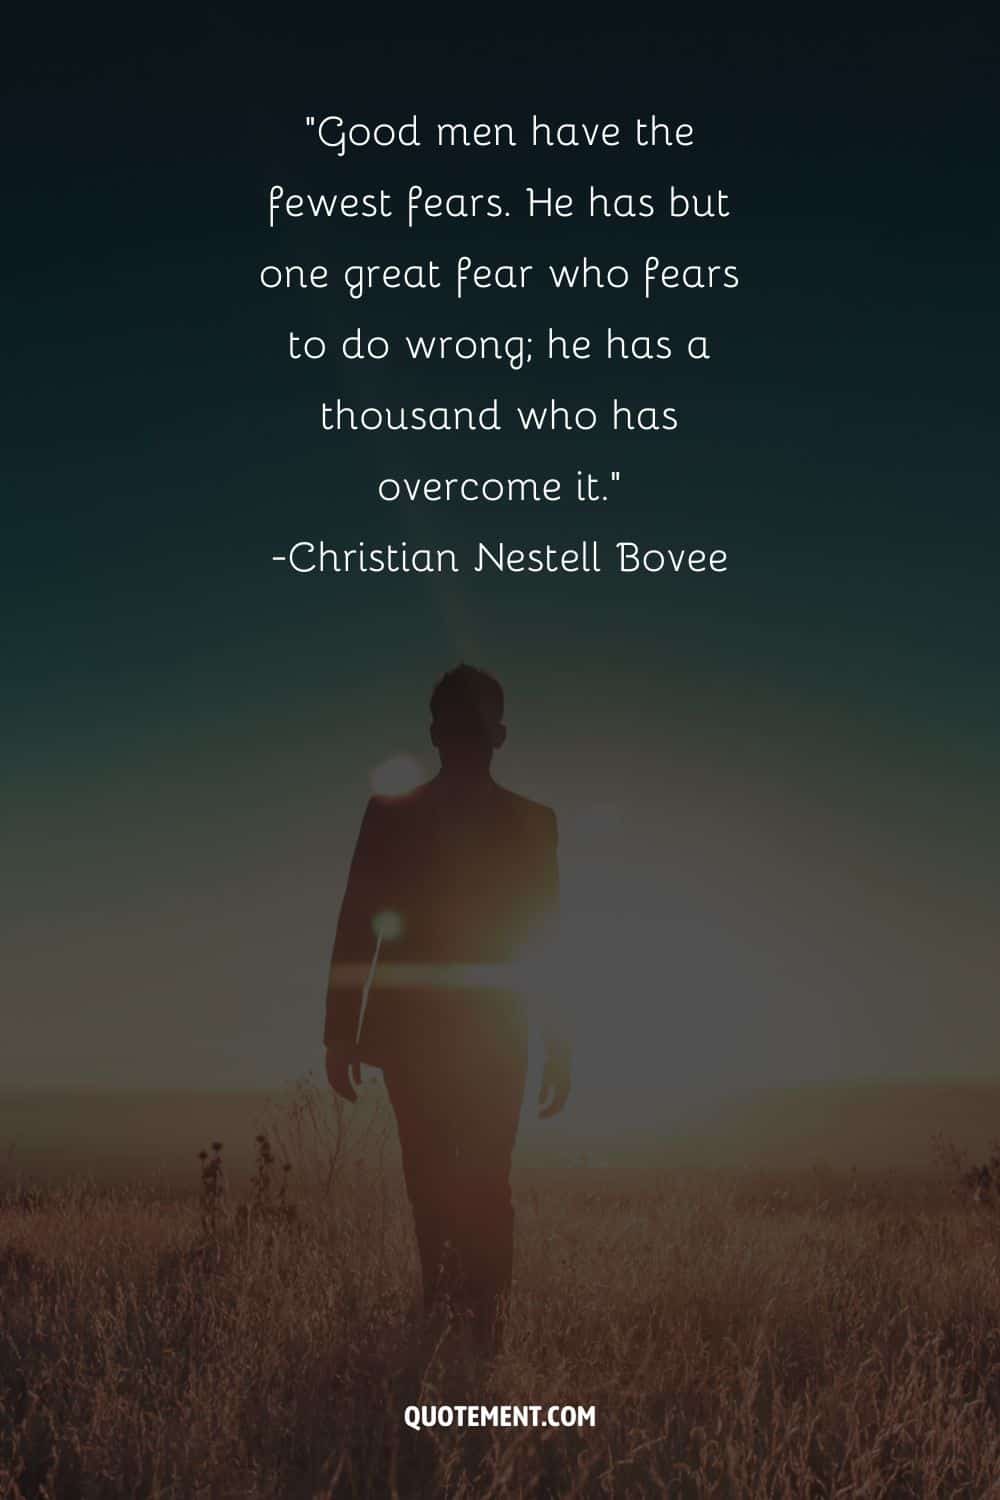 Good men have the fewest fears. He has but one great fear who fears to do wrong